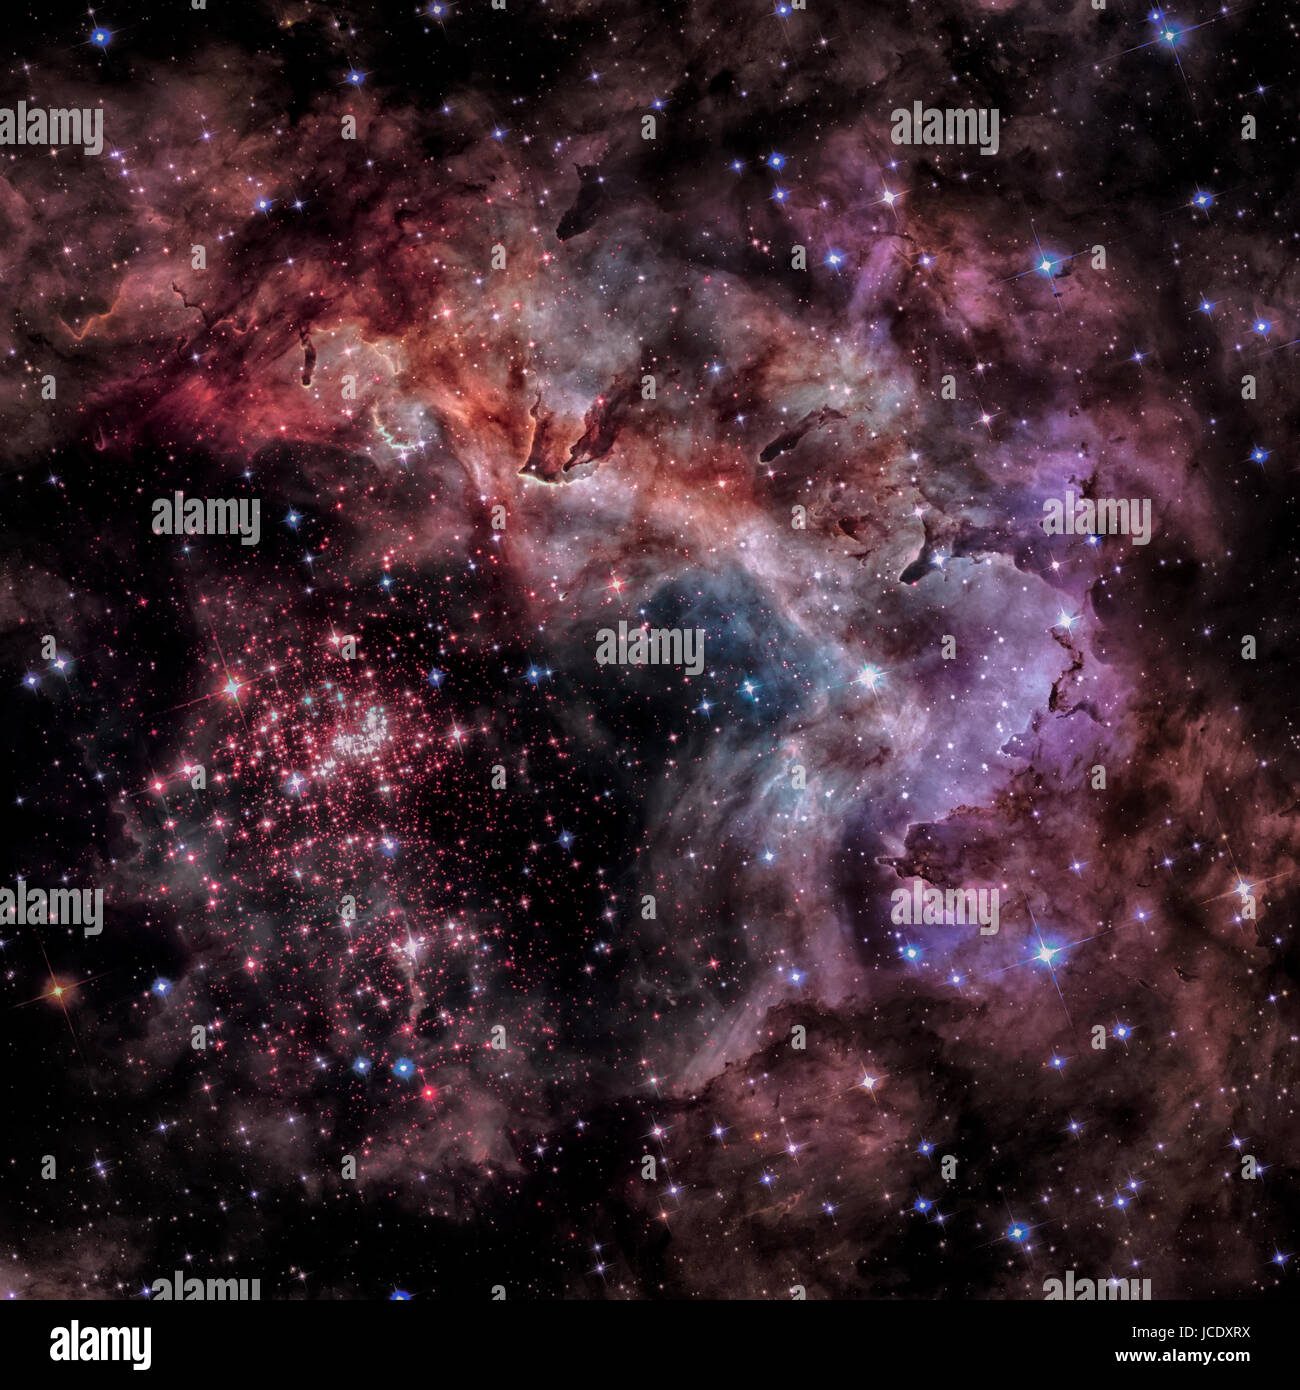 Westerlund 2 is an obscured compact young star cluster in the Milky Way. Super star cluster in the constellation Carina. Elements of this image furnis Stock Photo